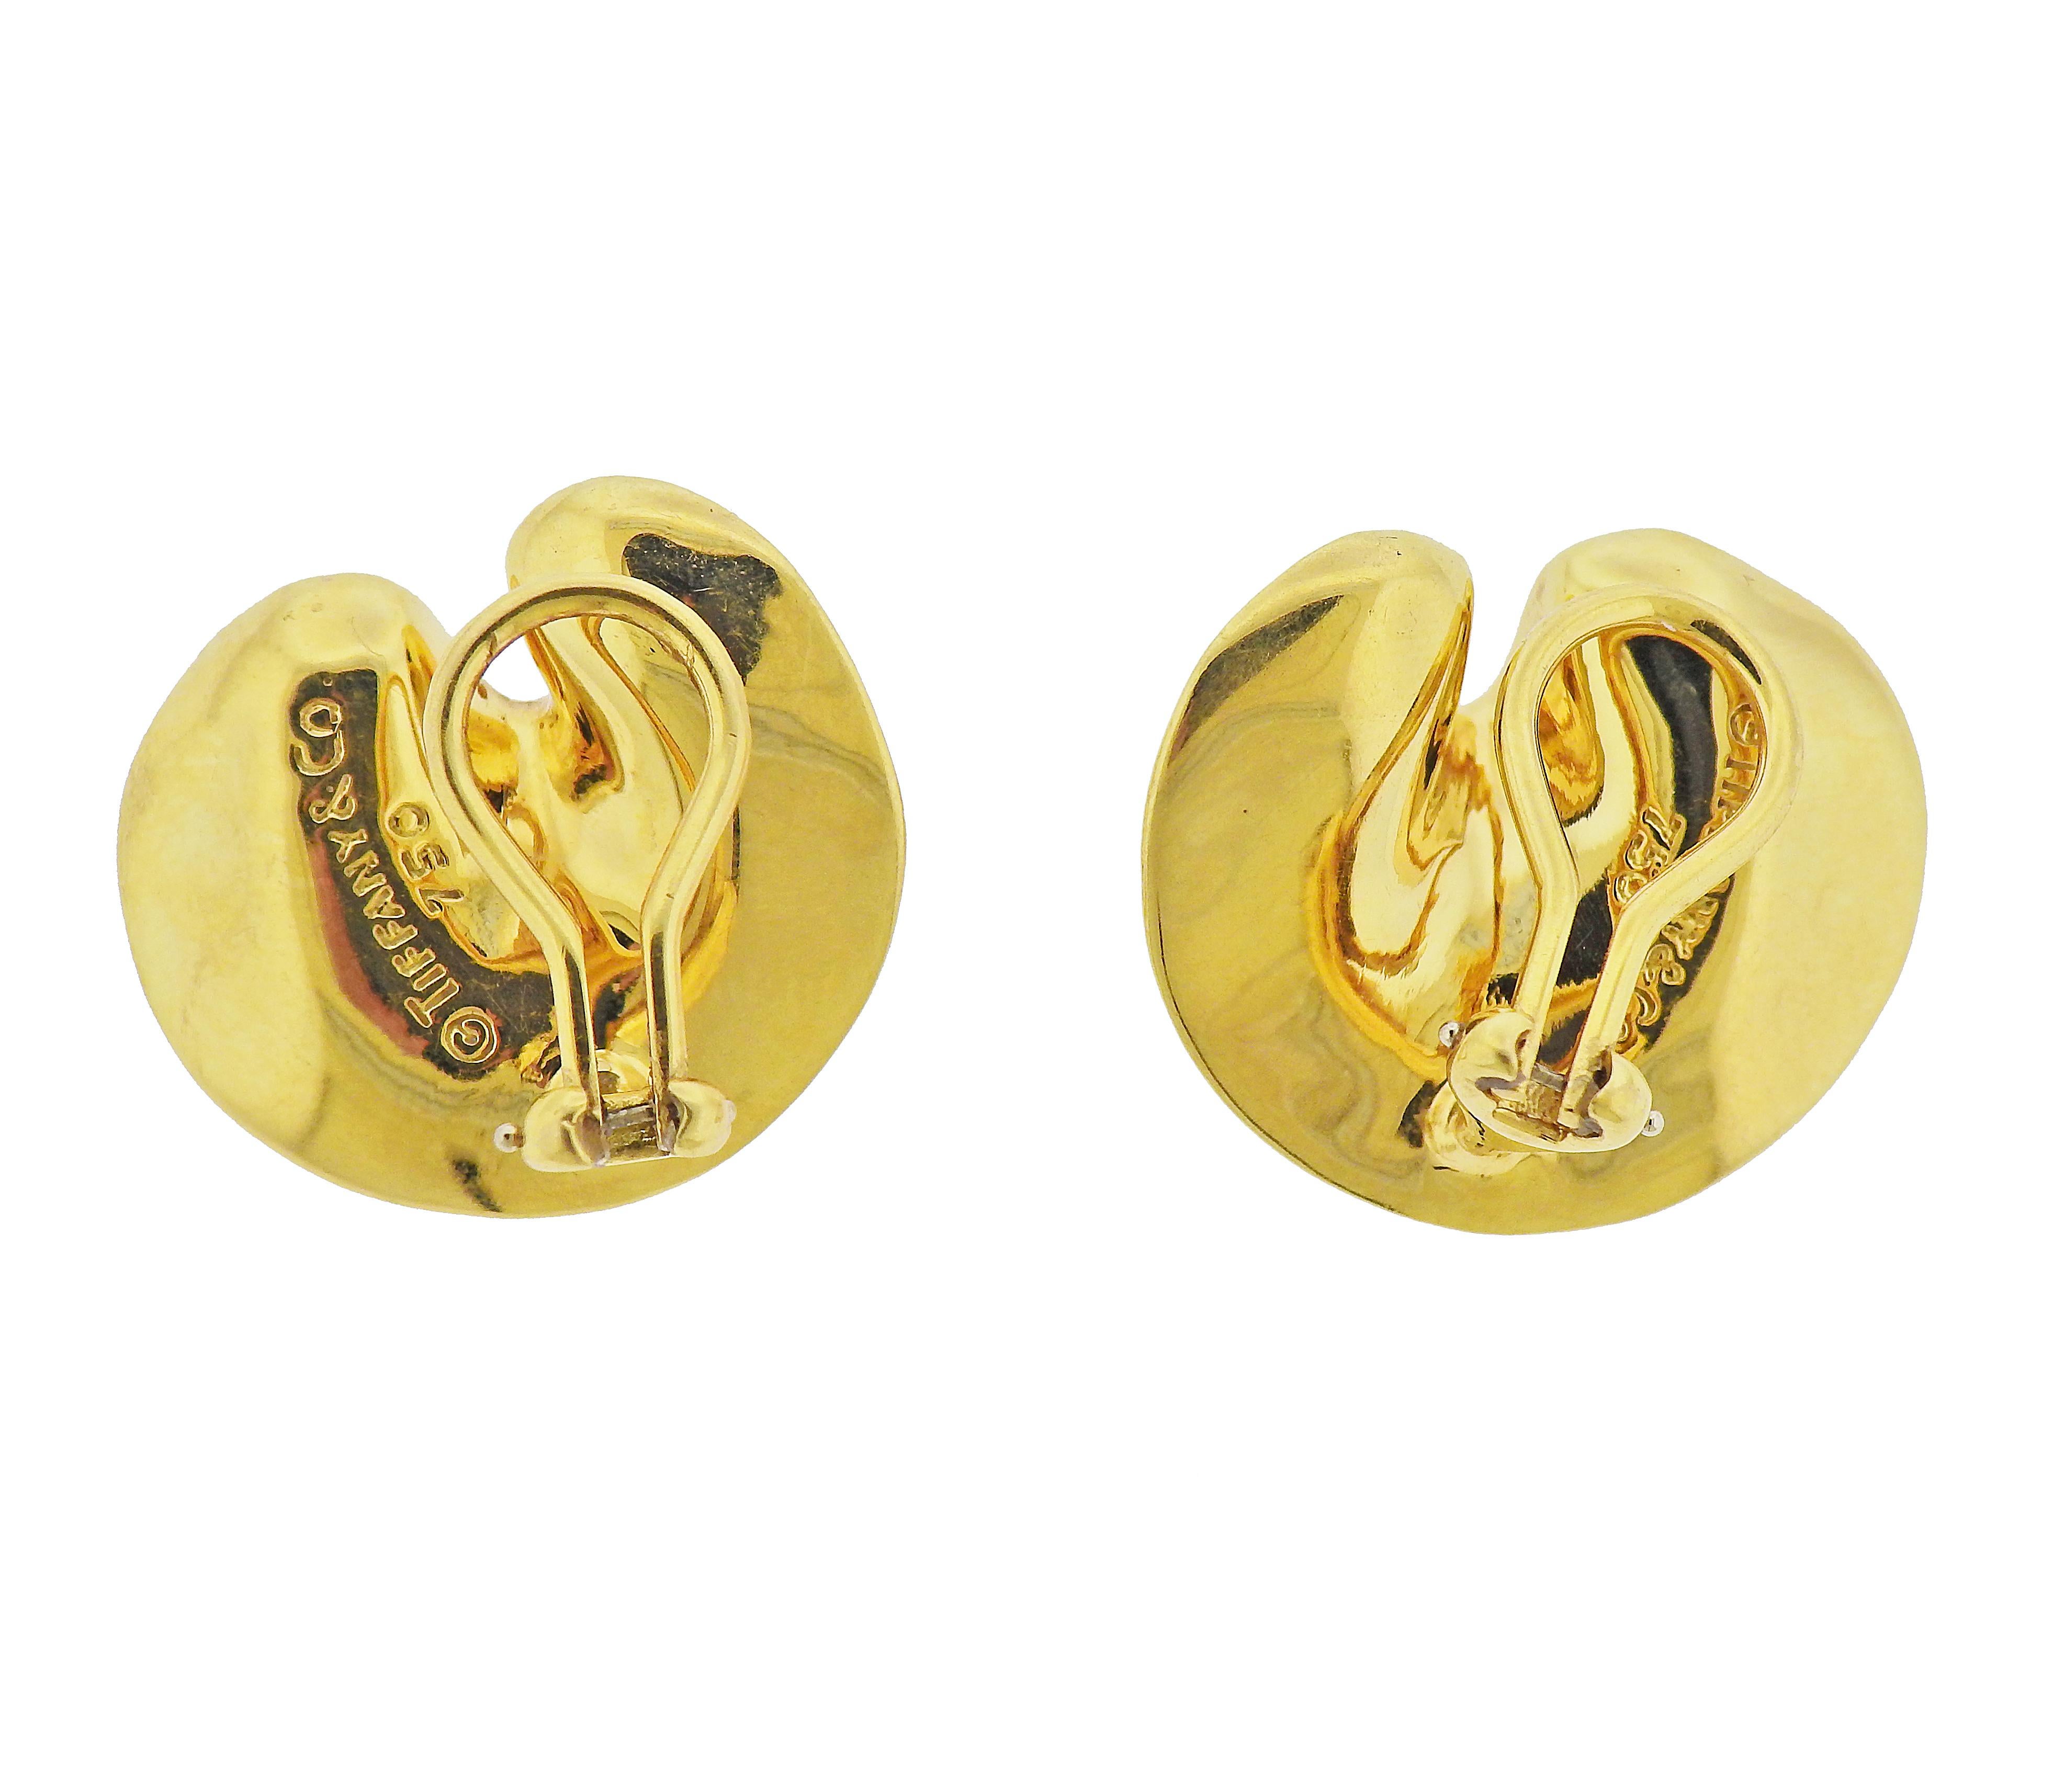 Pair of 18k gold petal earrings by Tiffany & Co. Earrings are 21mm x 23mm. Marked: Tiffany & Co, 750. Weight - 13.8 grams.